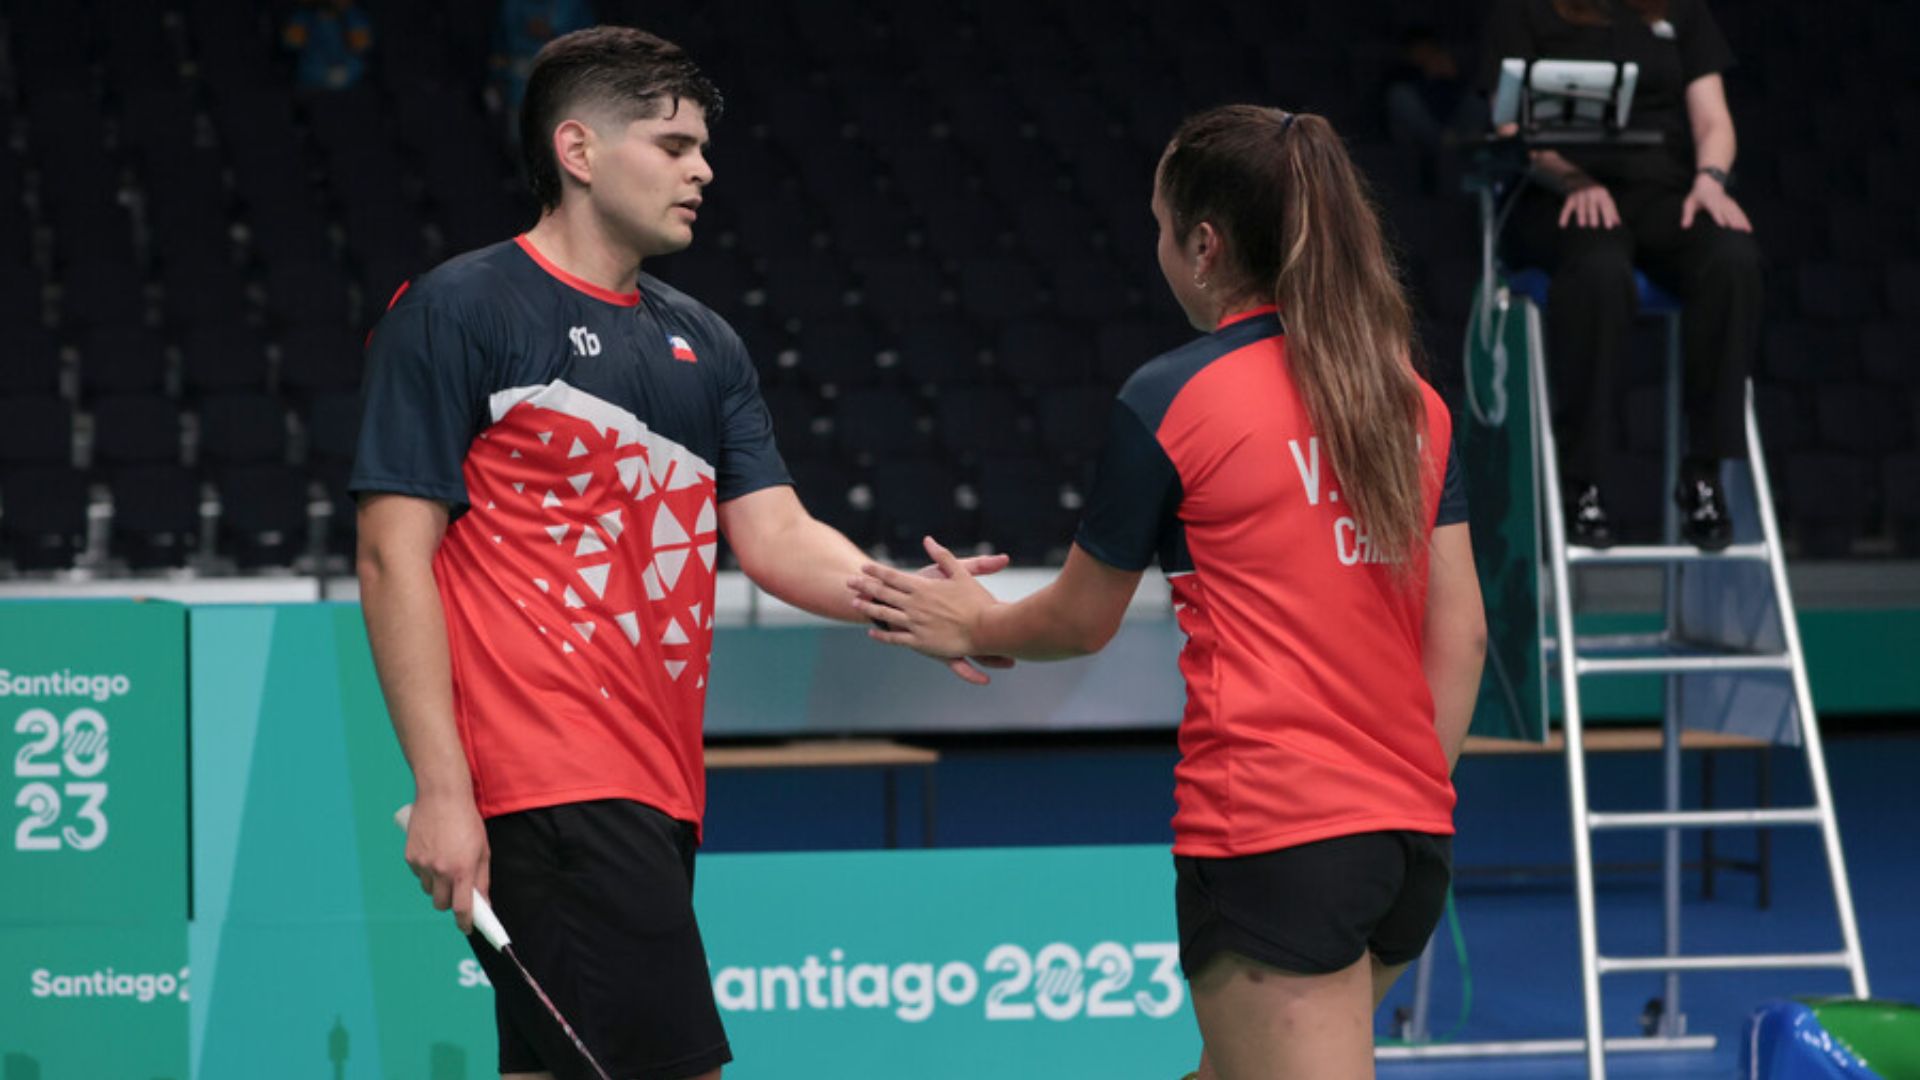 Double local surprise in Pan American badminton mixed doubles